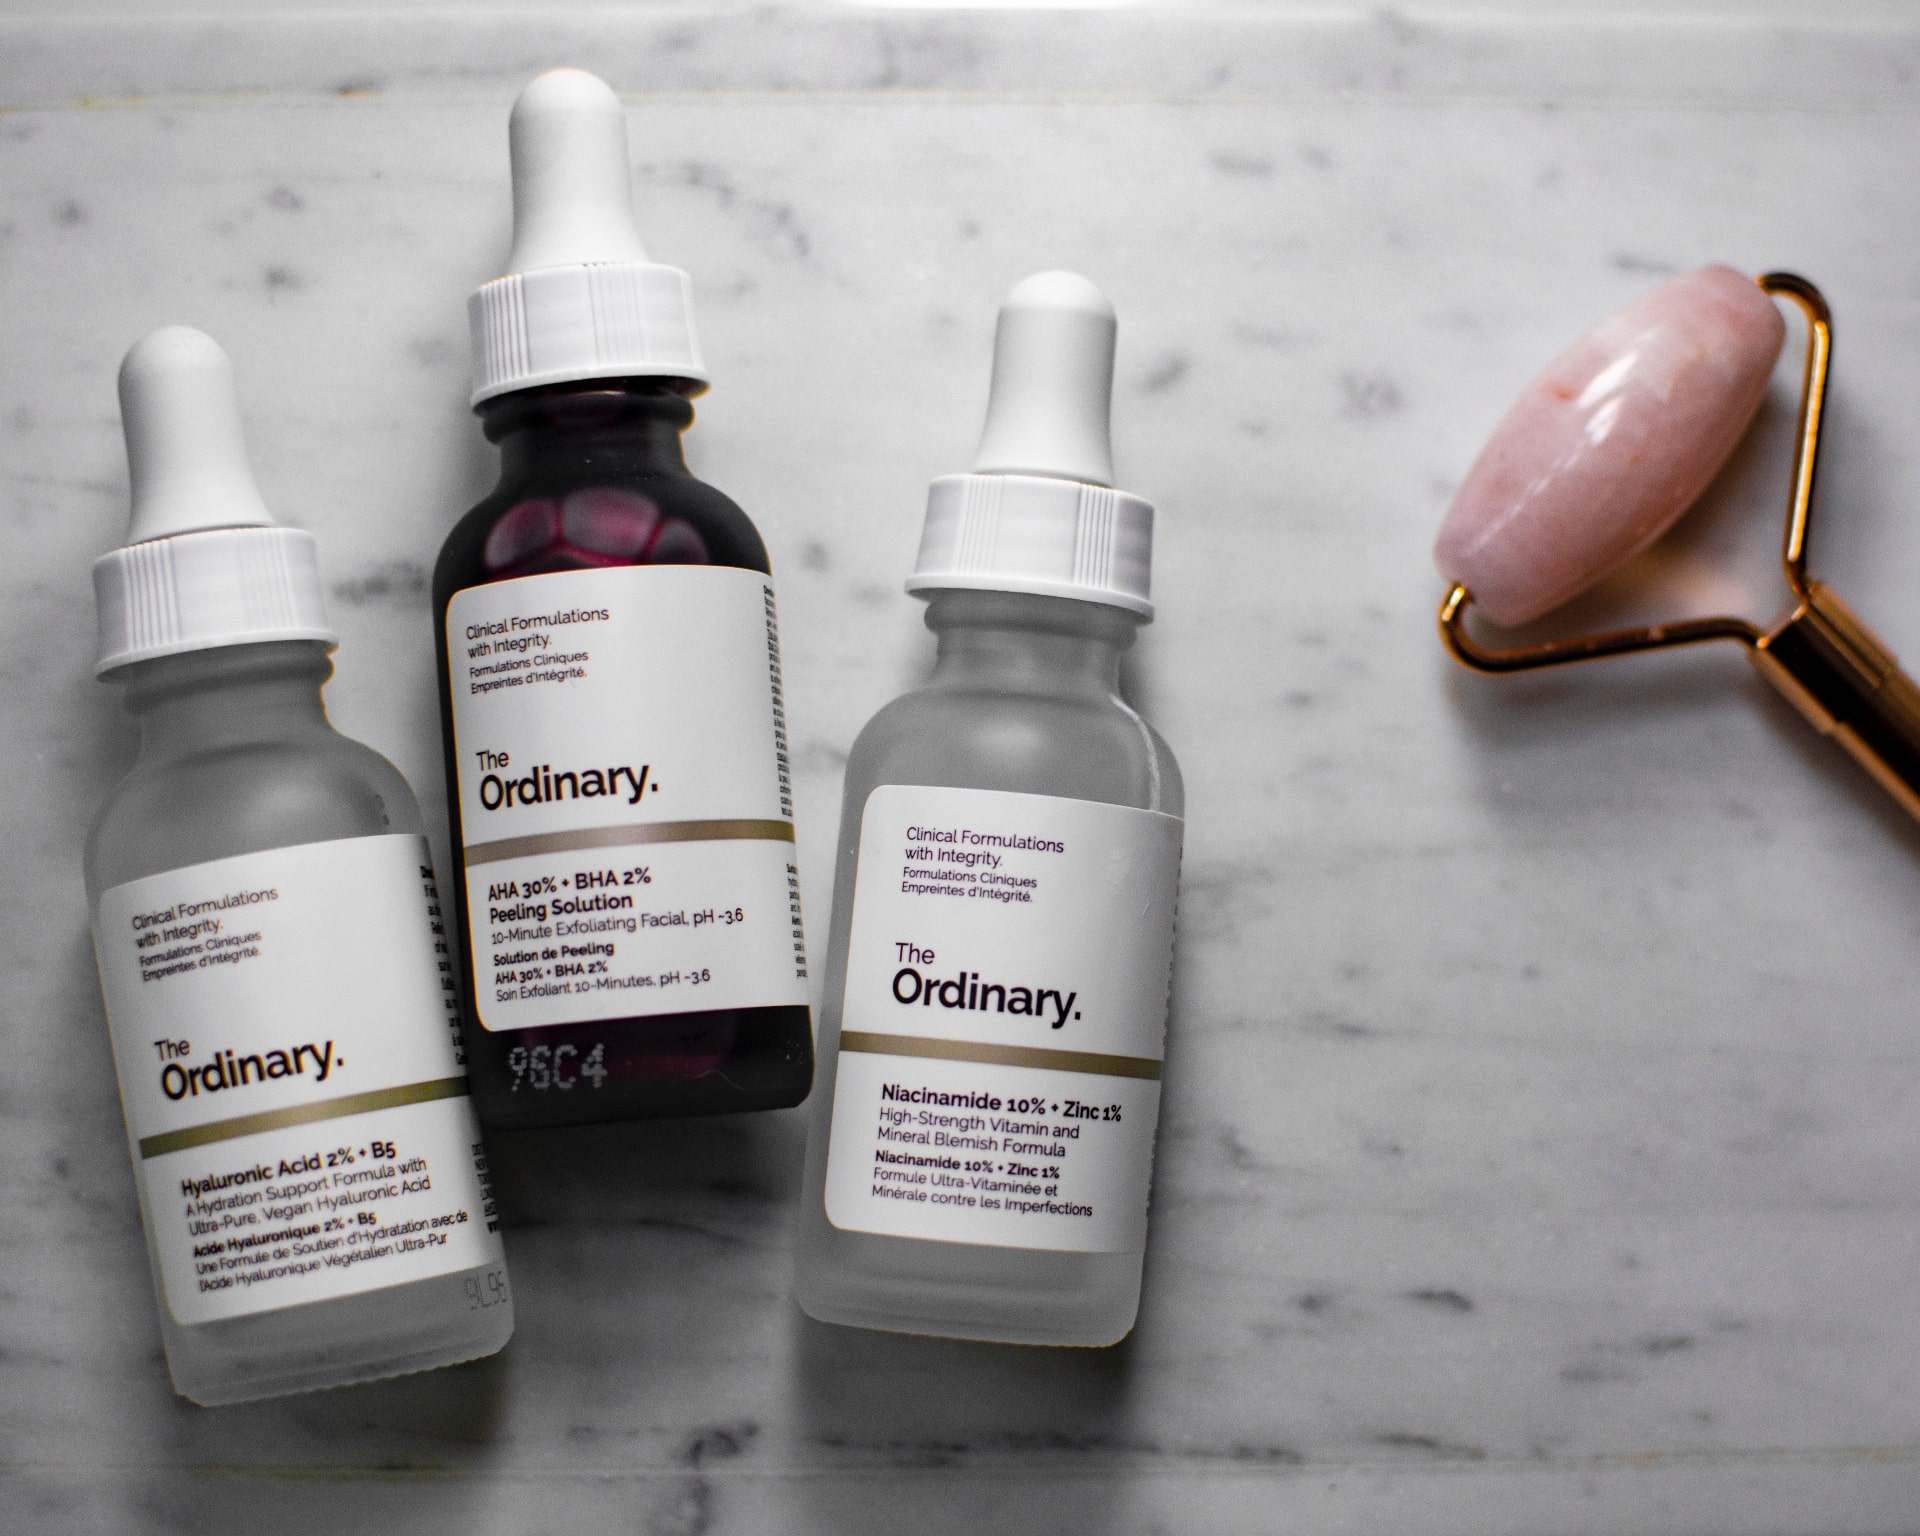 The Ordinary Serum for Hair Density - 2 Minute Review - Knackered At 40